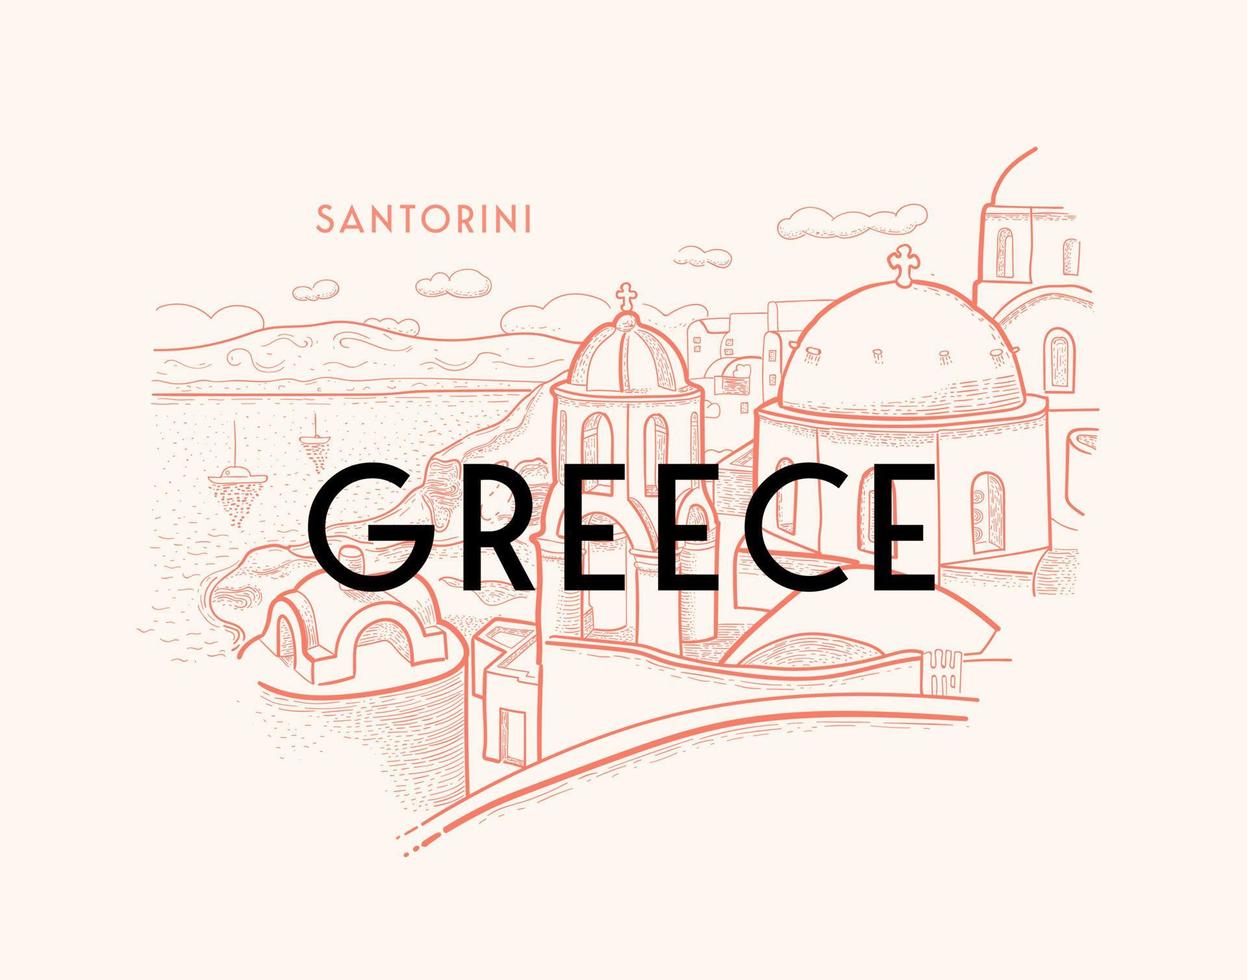 Santorini island, Greece. Beautiful traditional architecture and Greek Orthodox churches. The Aegean sea. Advertising card, flyer. Vector illustration in engraving style